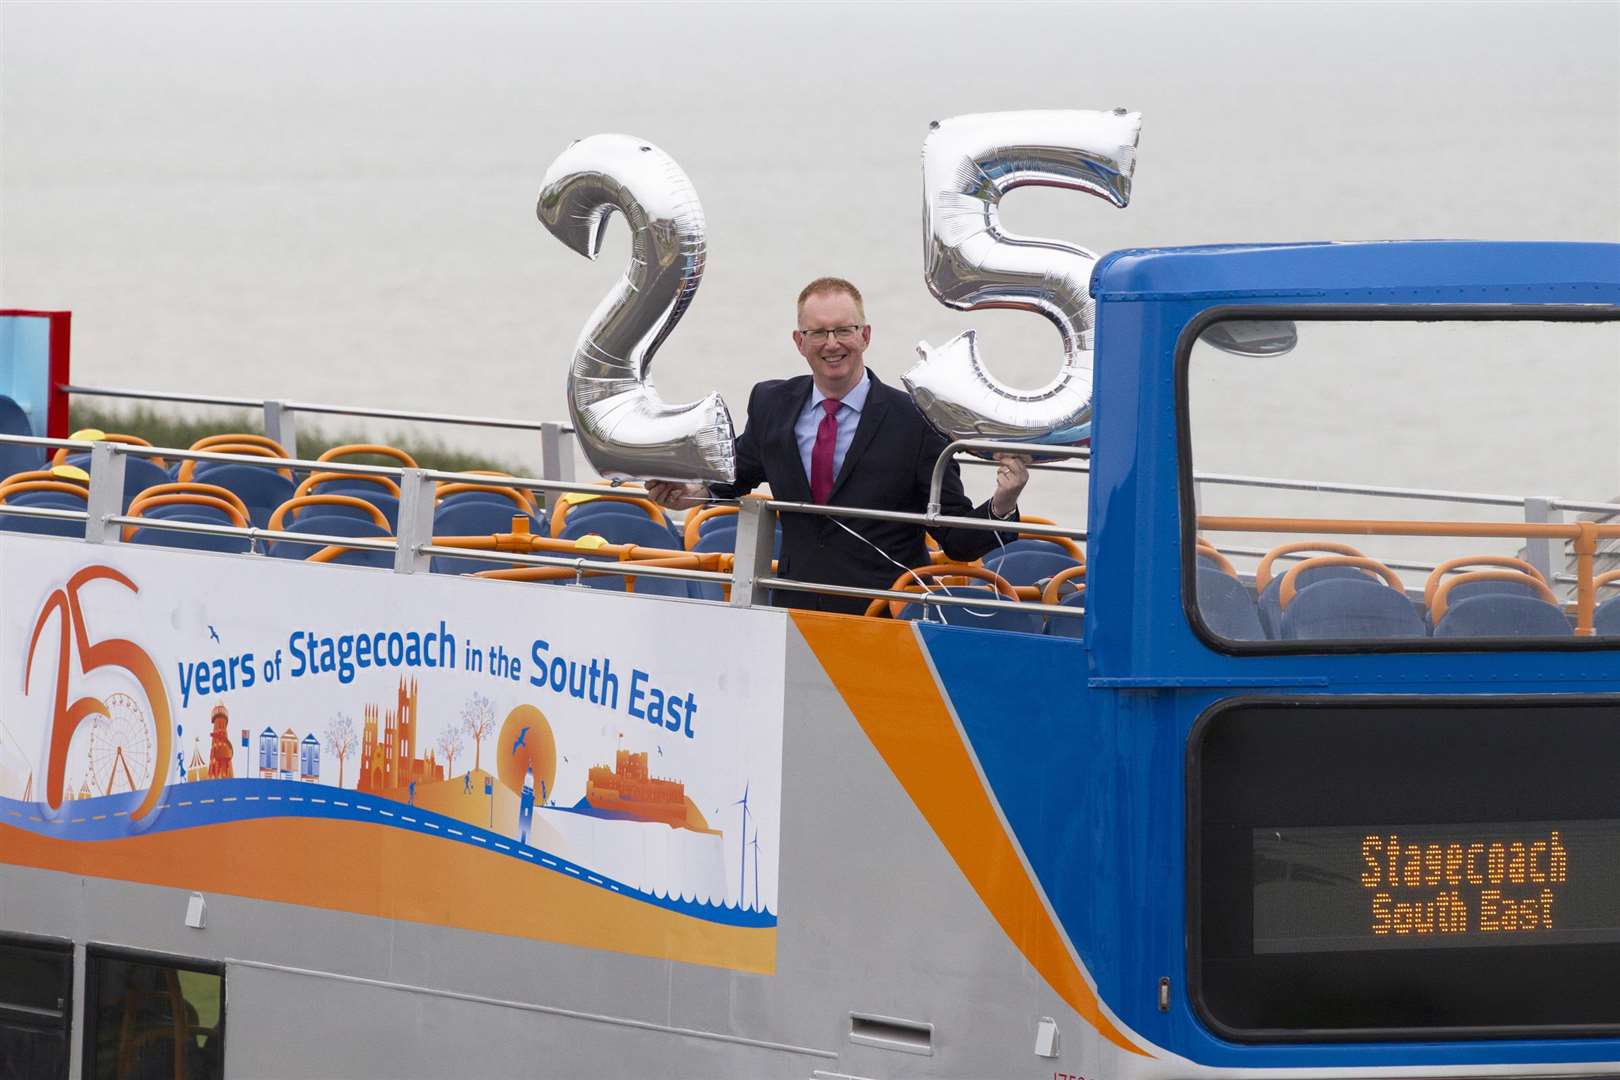 Matthew Arnold, commercial director at Stagecoach South East, celebrating the company’s 25th anniversary with the silver liveried buses (4053559)